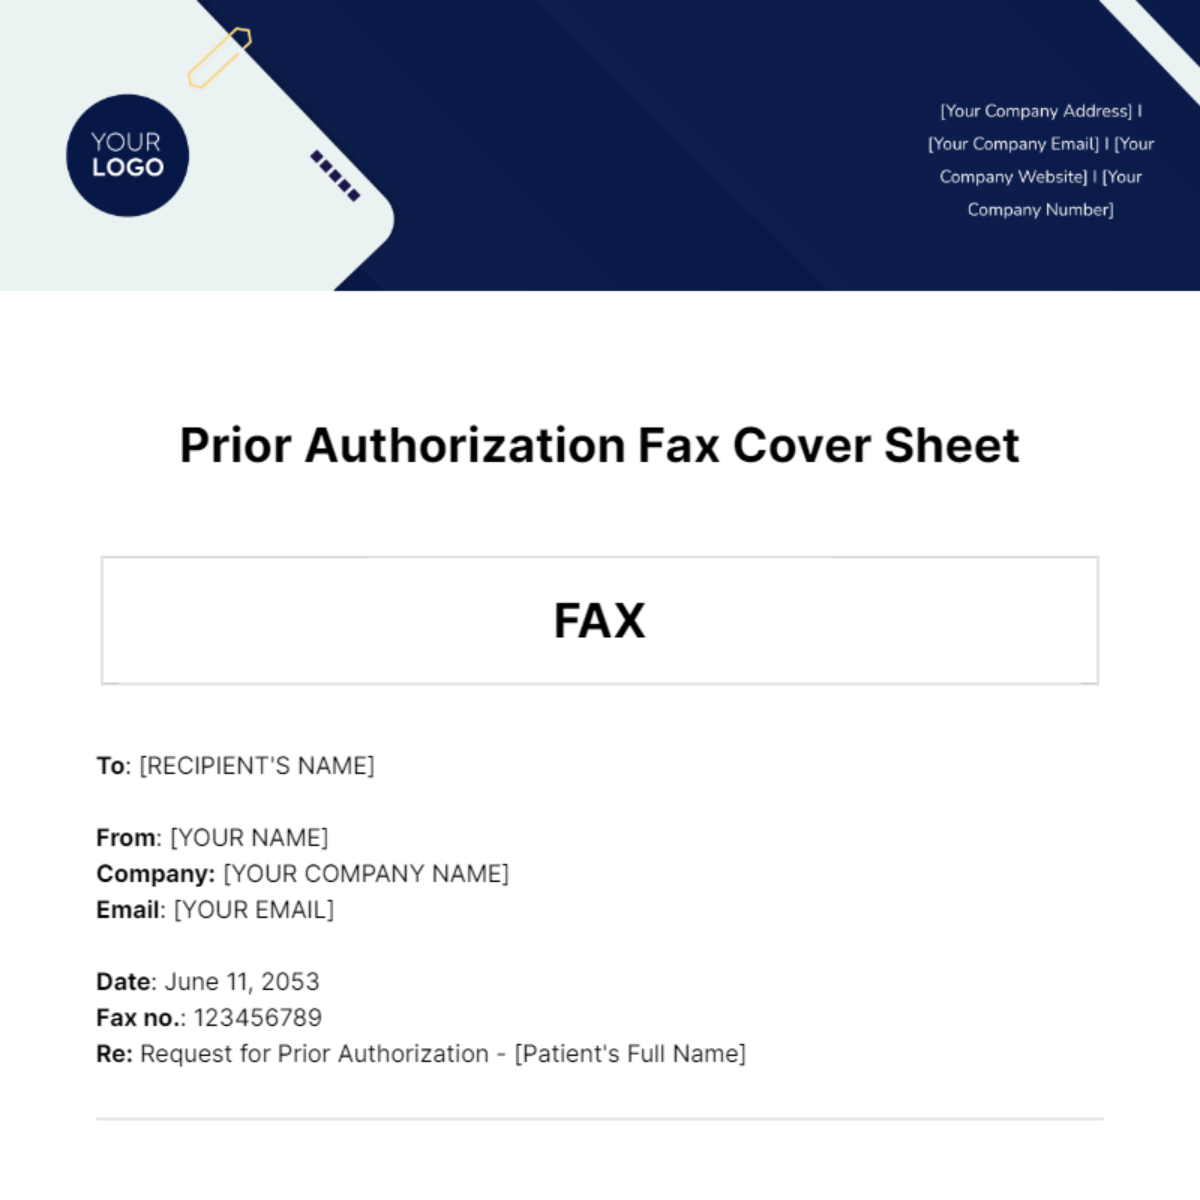 Prior Authorization Fax Cover Sheet Template